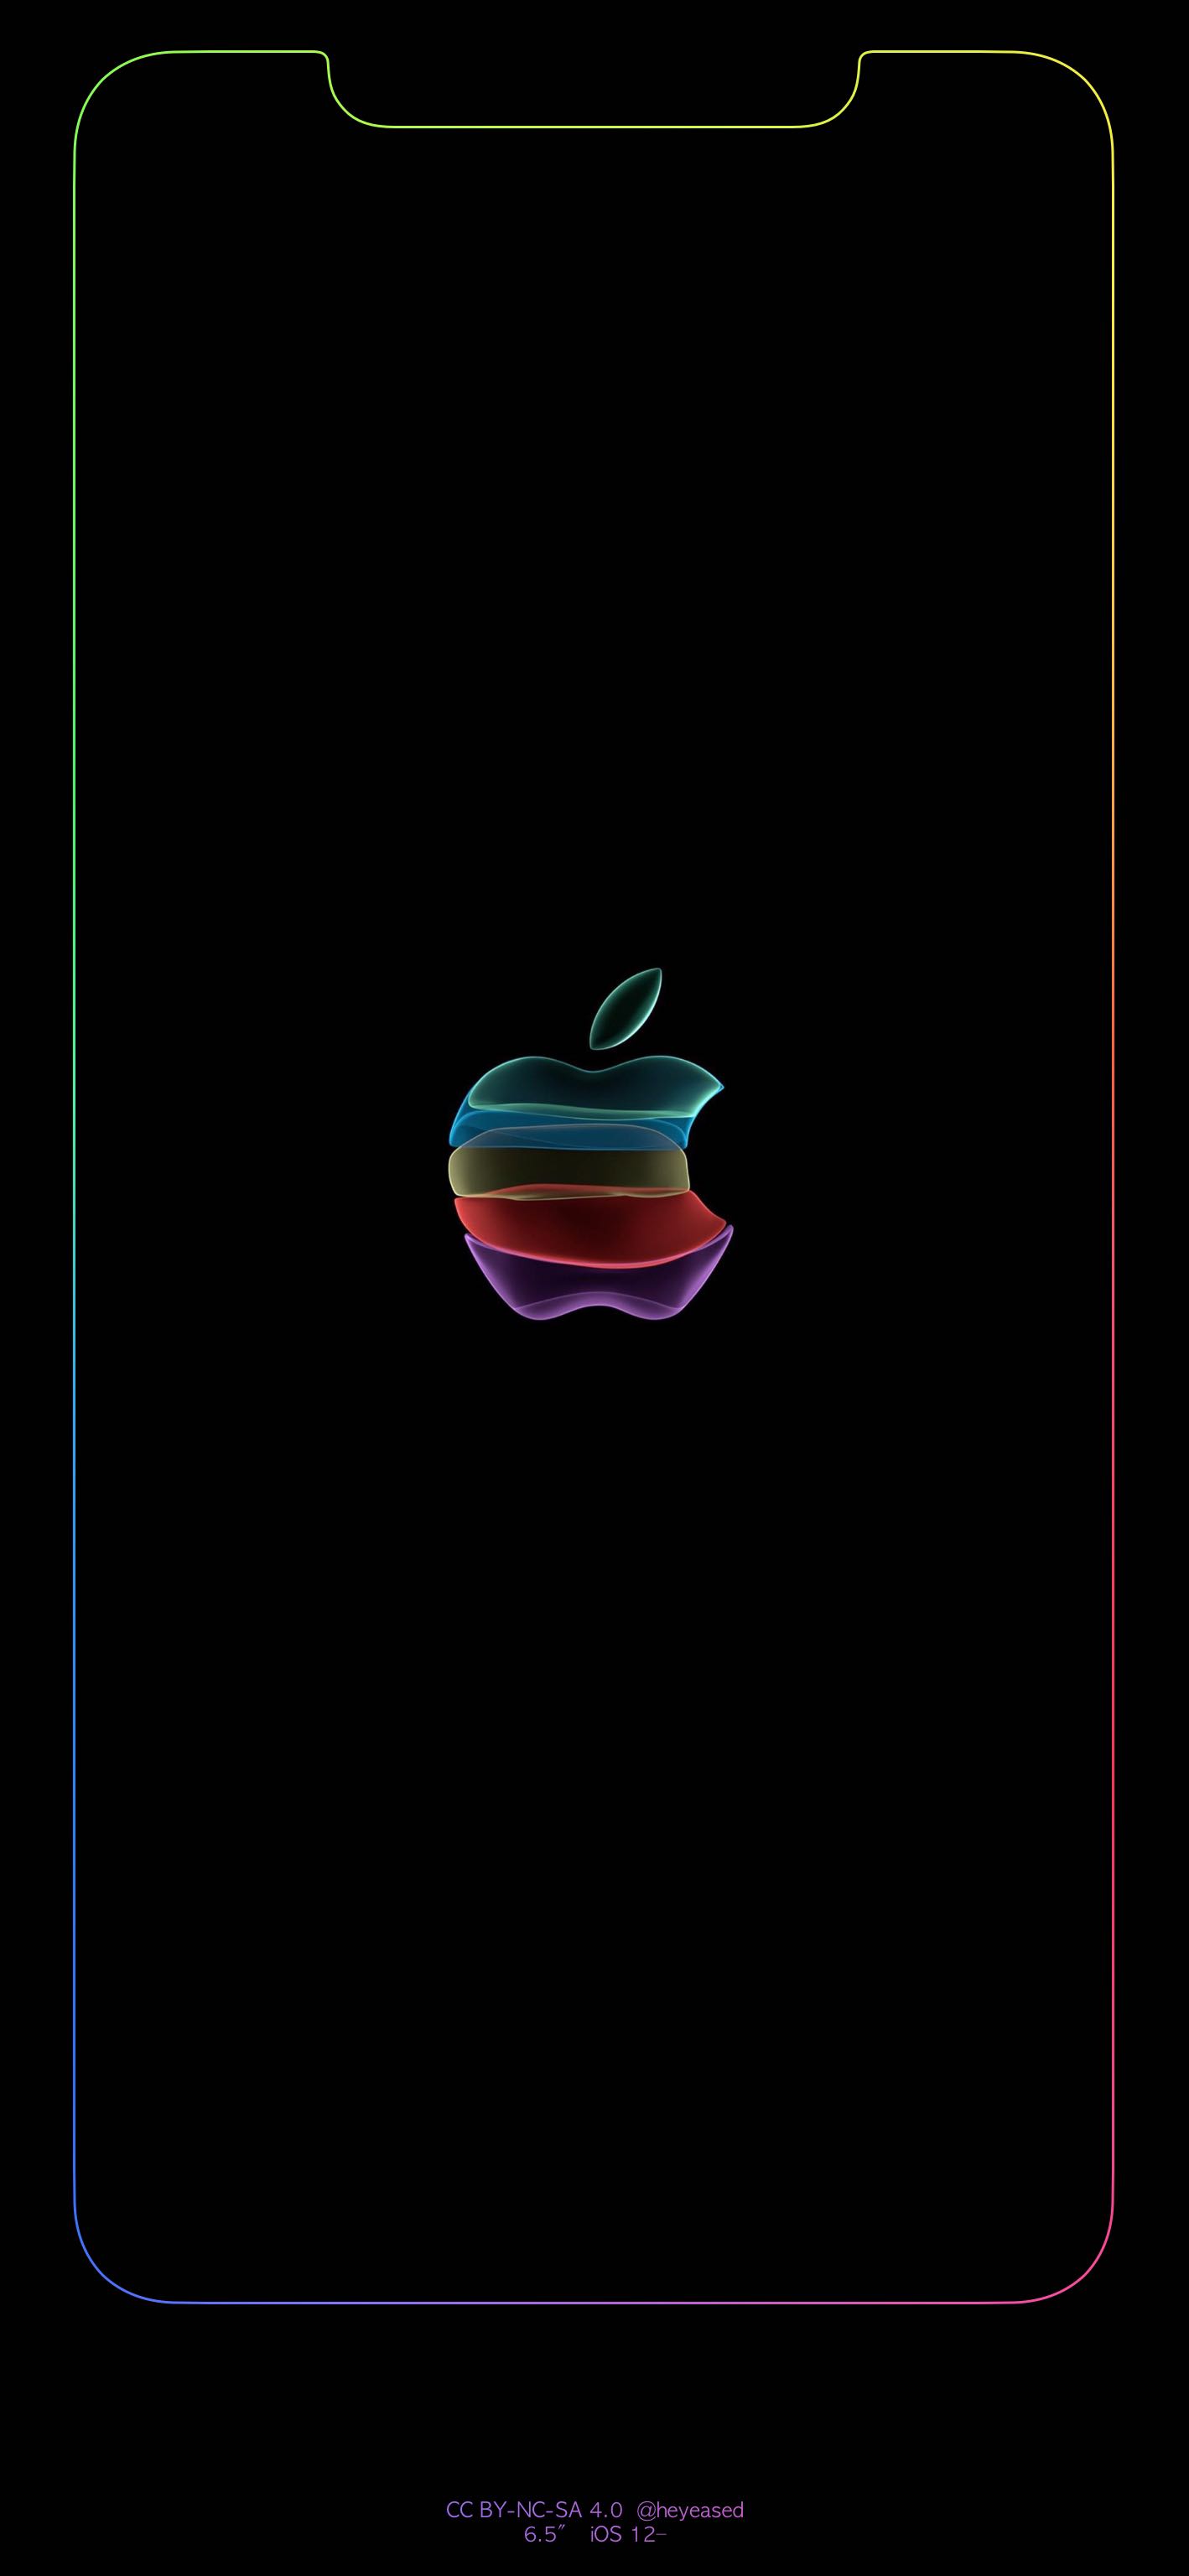 iPhone 11 Pro Max, XS Max : iphonexwallpapers